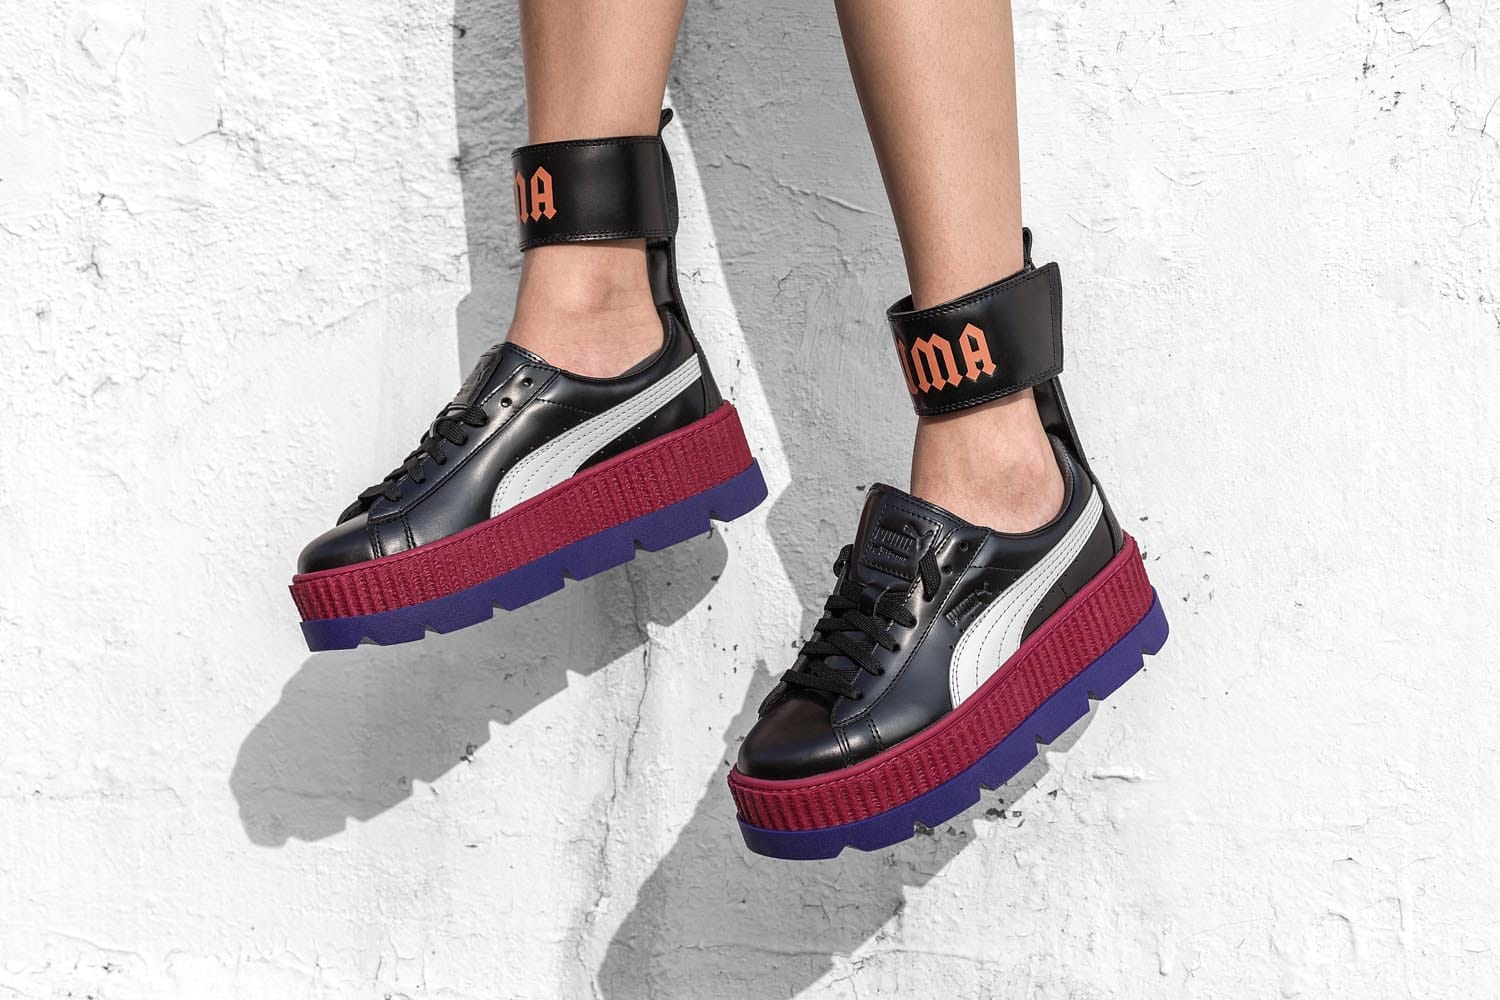 puma creepers with ankle strap